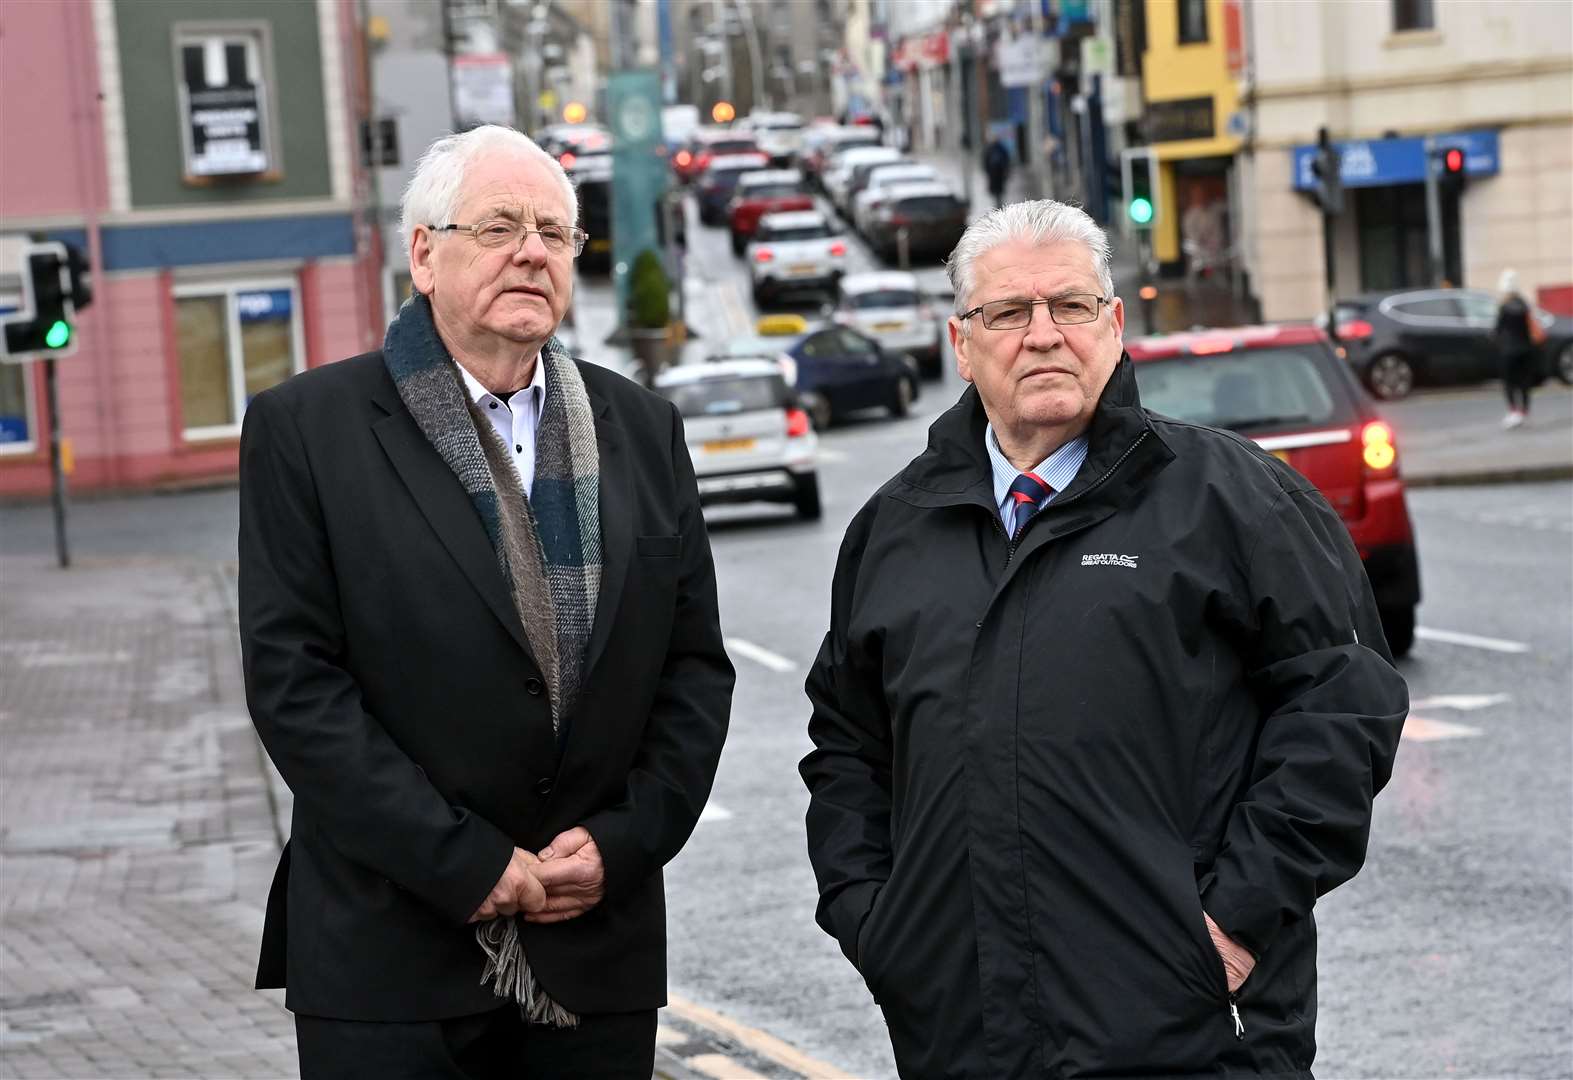 Omagh bomb campaigners Michael Gallagher, left, and Stanley McCombe in Omagh on Thursday (Oliver McVeigh/PA).